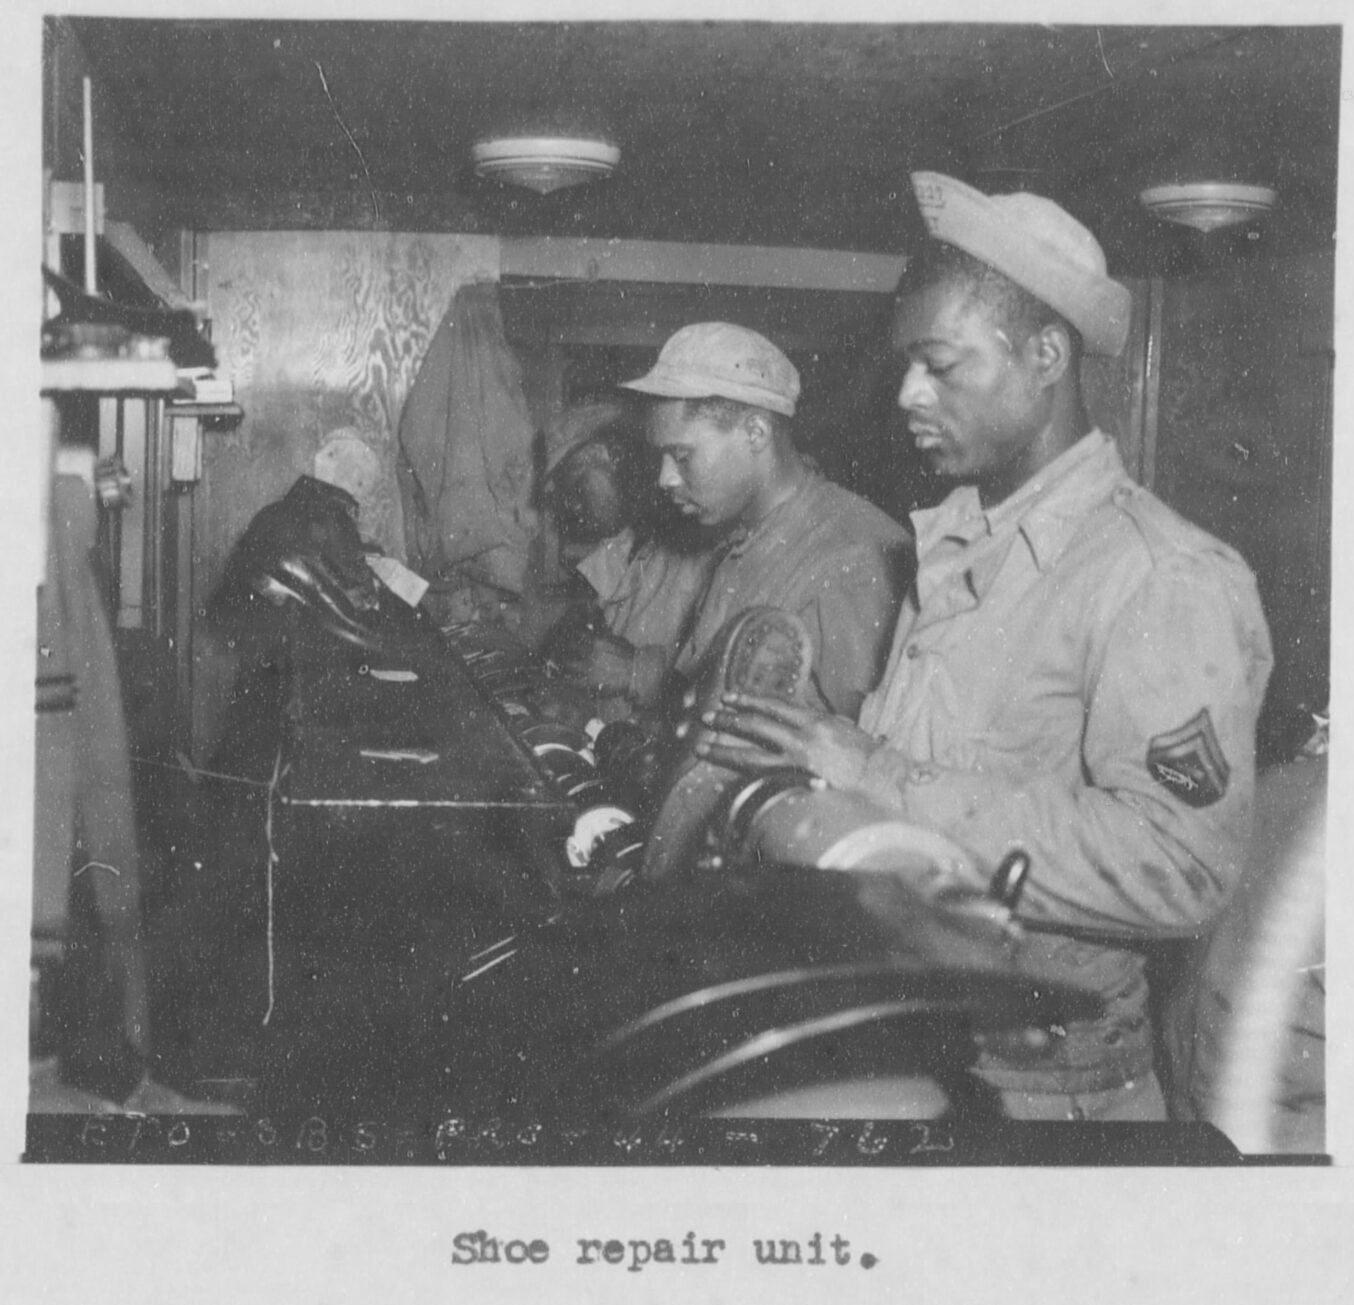 Black and white photo of Black American GIs repairing shoes, Caption reads shoe repair unit.